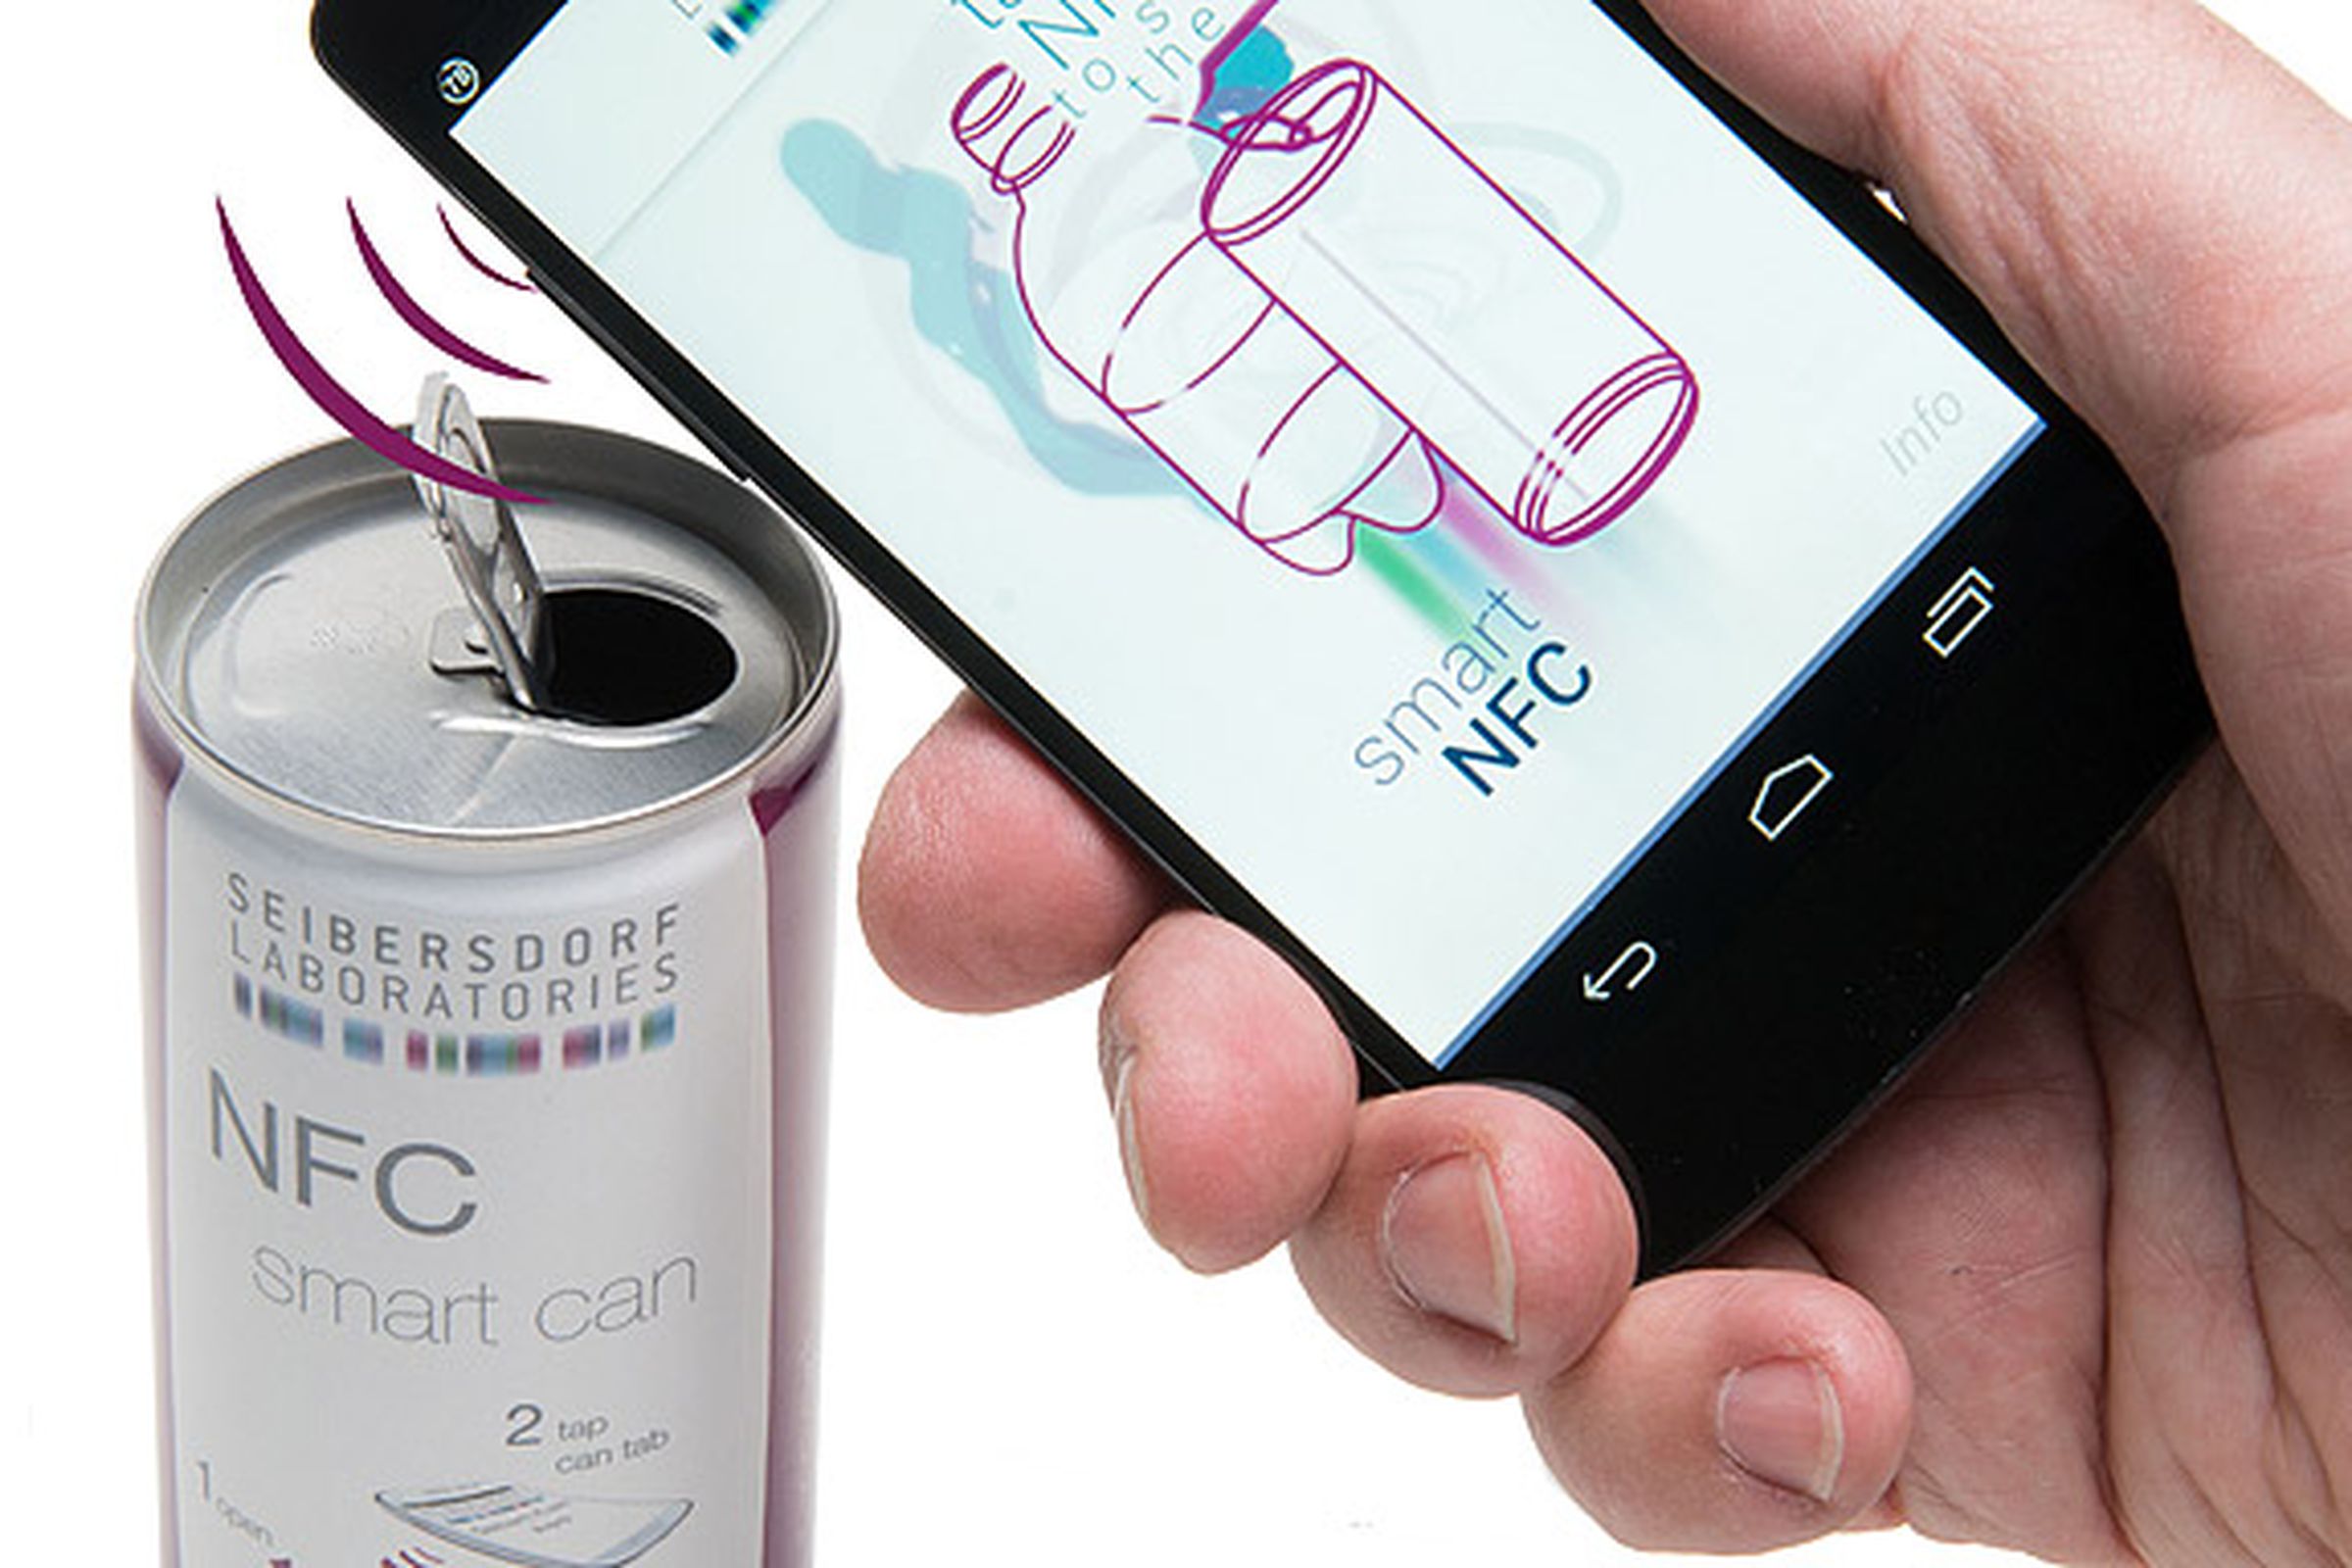 NFC-enabled smart can